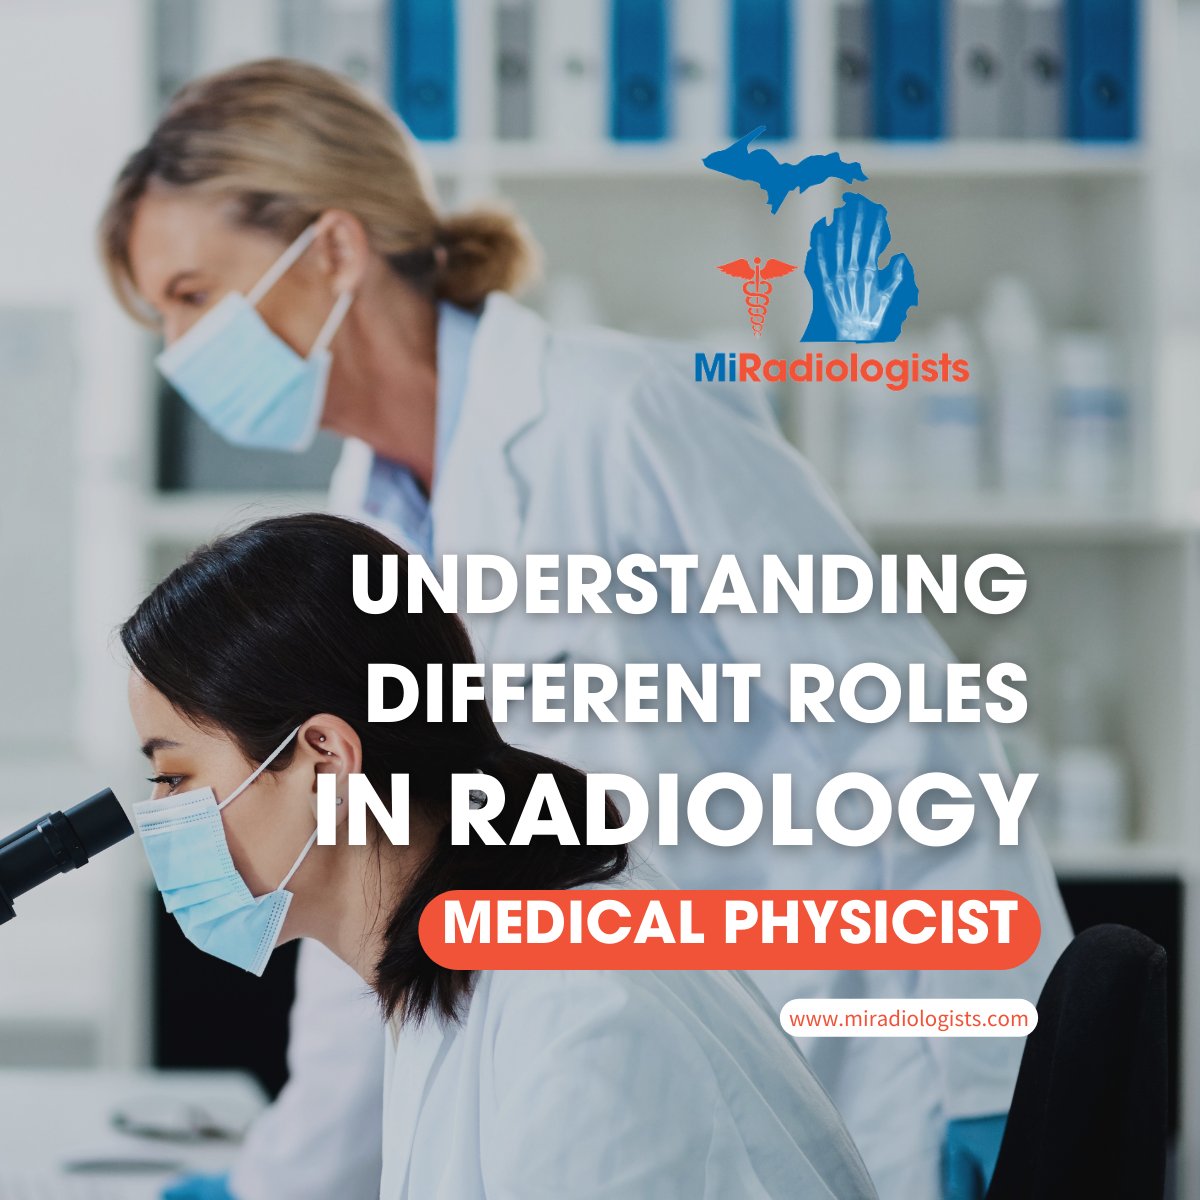 Did you know that there are many different roles in radiology? Medical physicists ensure safe radiation therapy and imaging procedures. Explore radiology roles at miradiologists.com/about. #Radiology #Radiologist #MedicalImaging #Healthcare #MichiganHealthcare